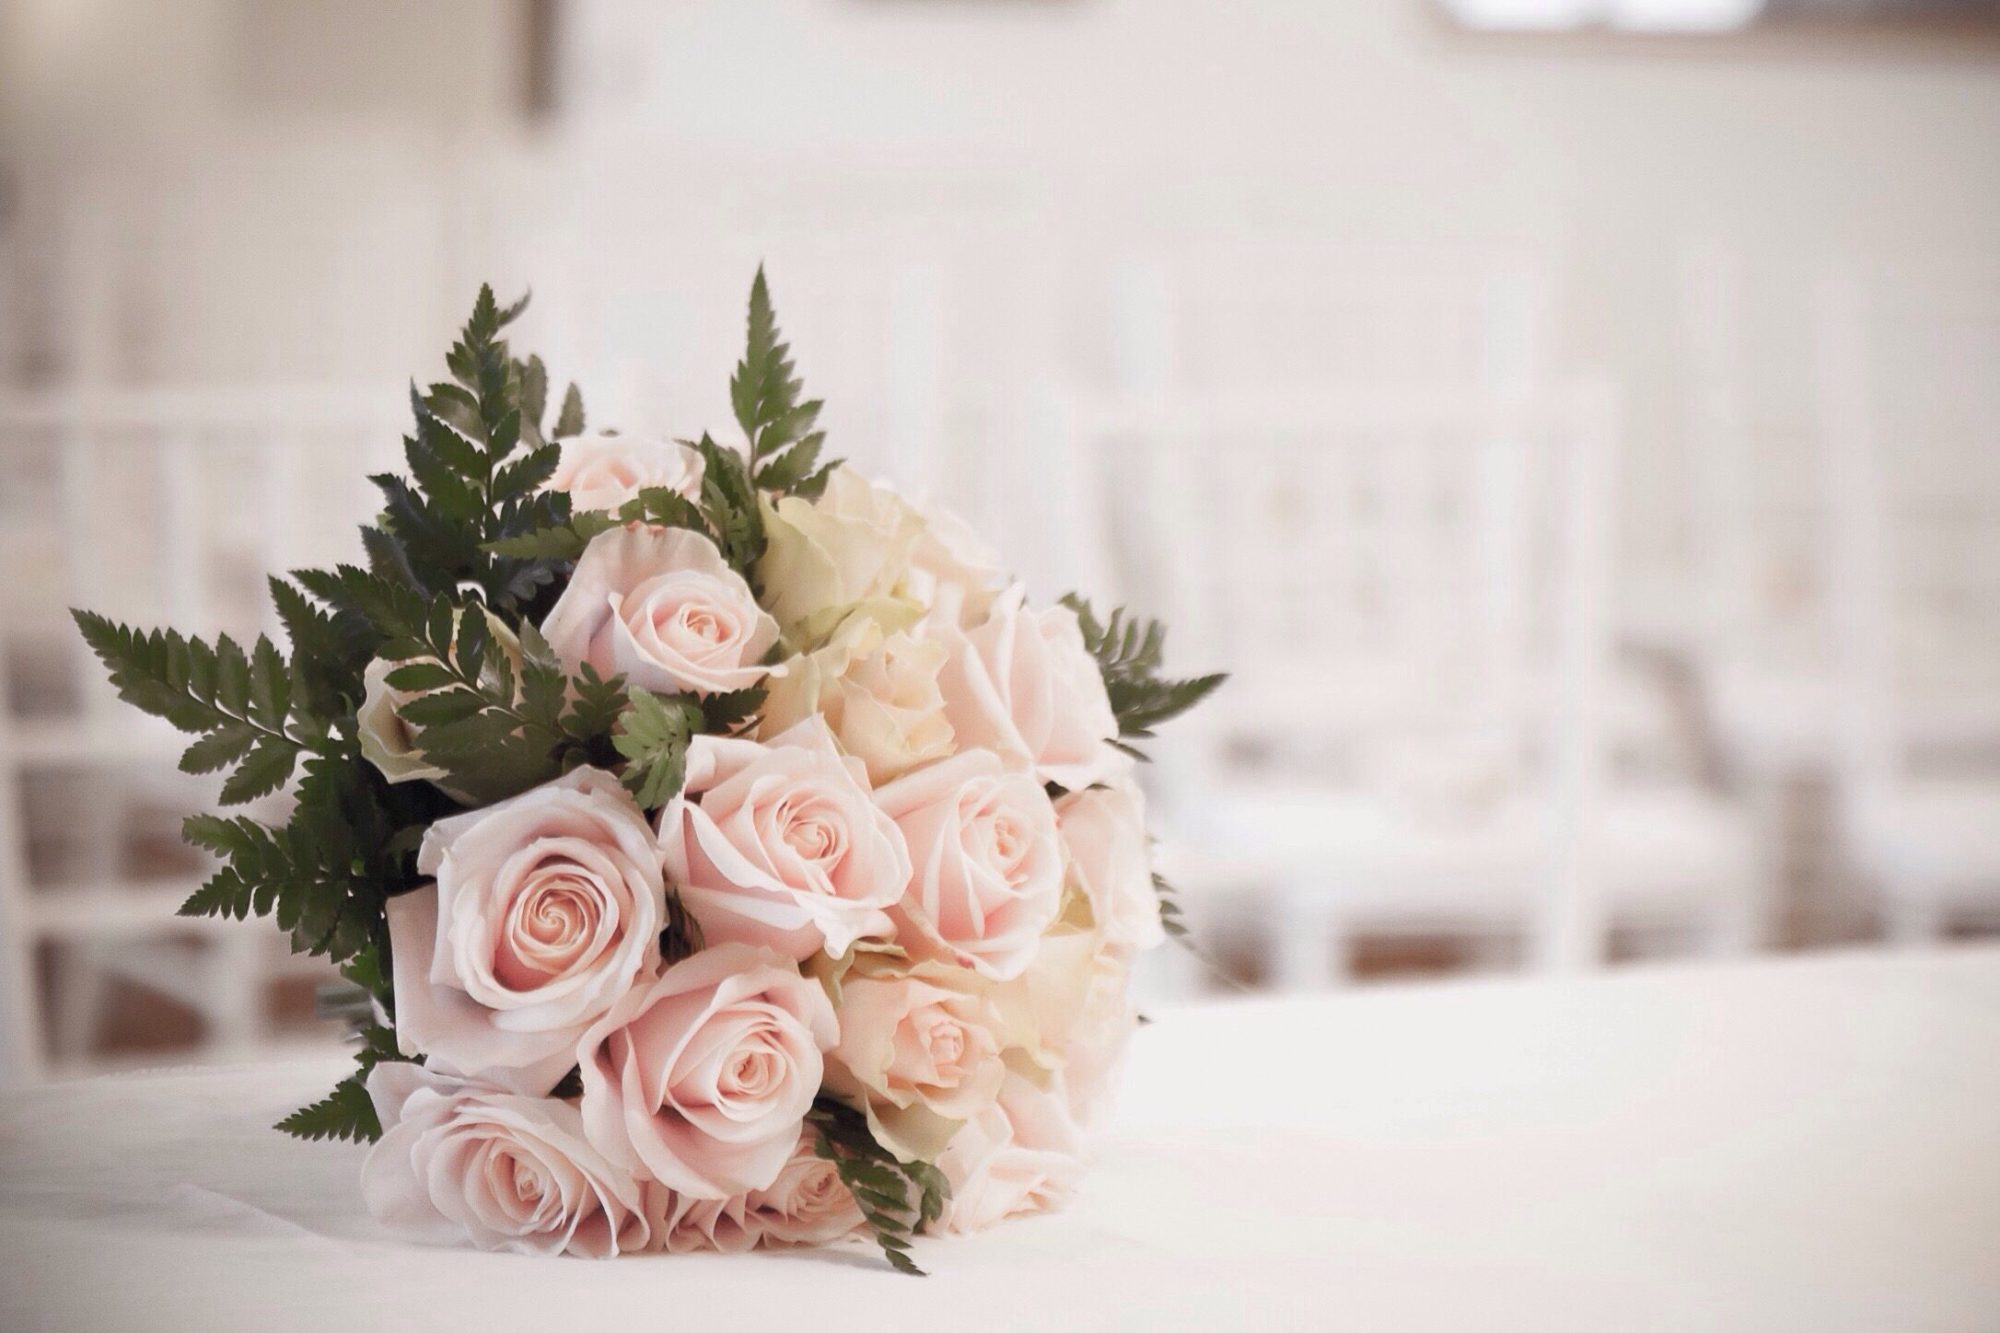 bouquet-of-roses-on-table-at-wedding-683866307-5a8207778023b90037a1f946